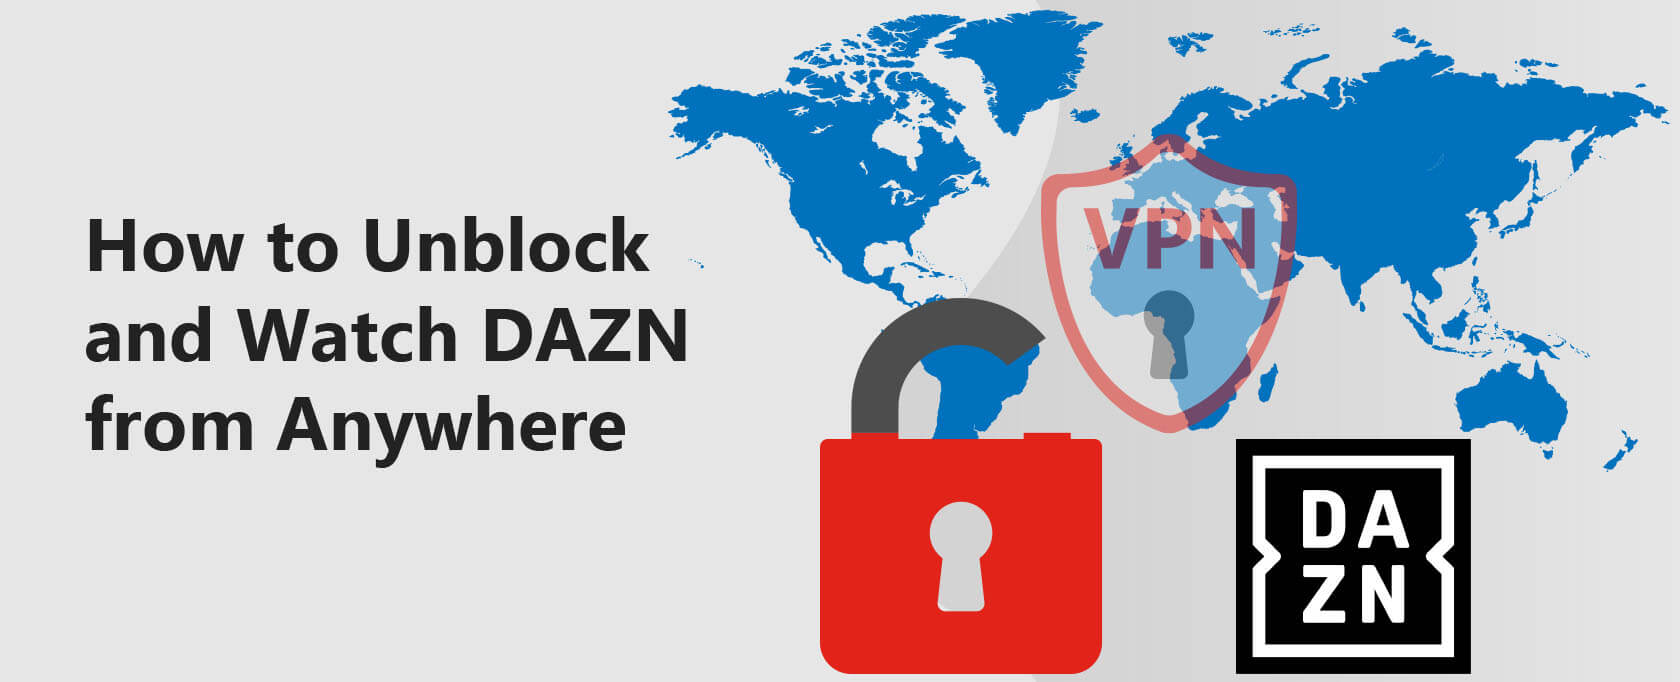 DAZN VPN: How to Unblock and Watch DAZN from Anywhere